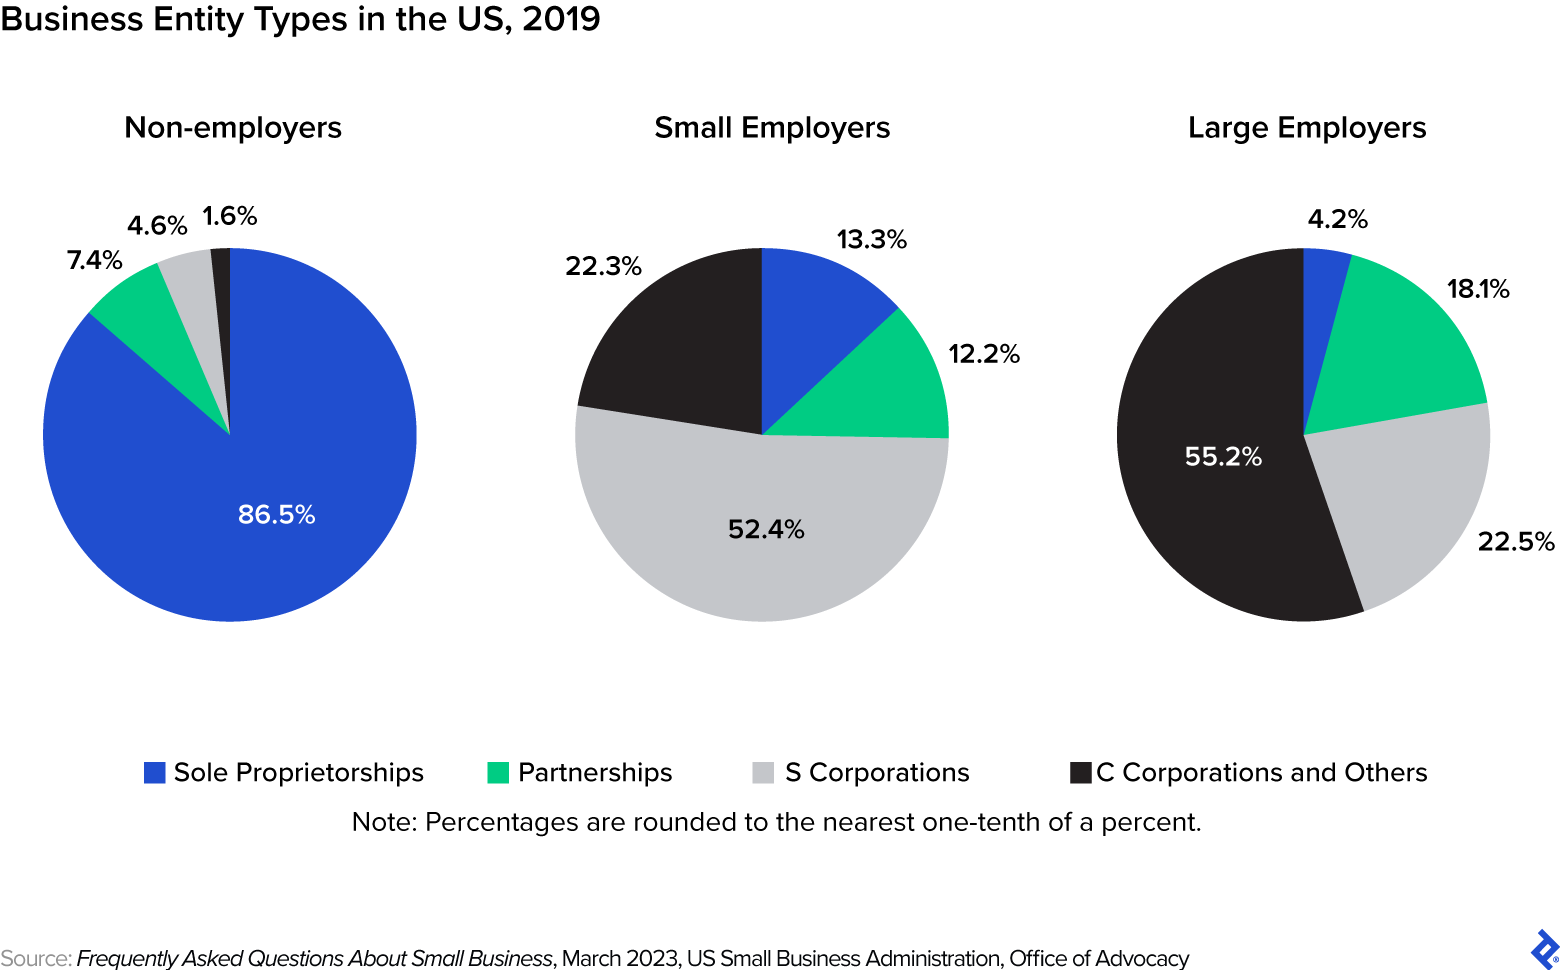 Three pie charts display entity preferences based on company size. Large employers are typically C corps, non-employers are typically sole proprietorships, and the majority of small employers are S corps.